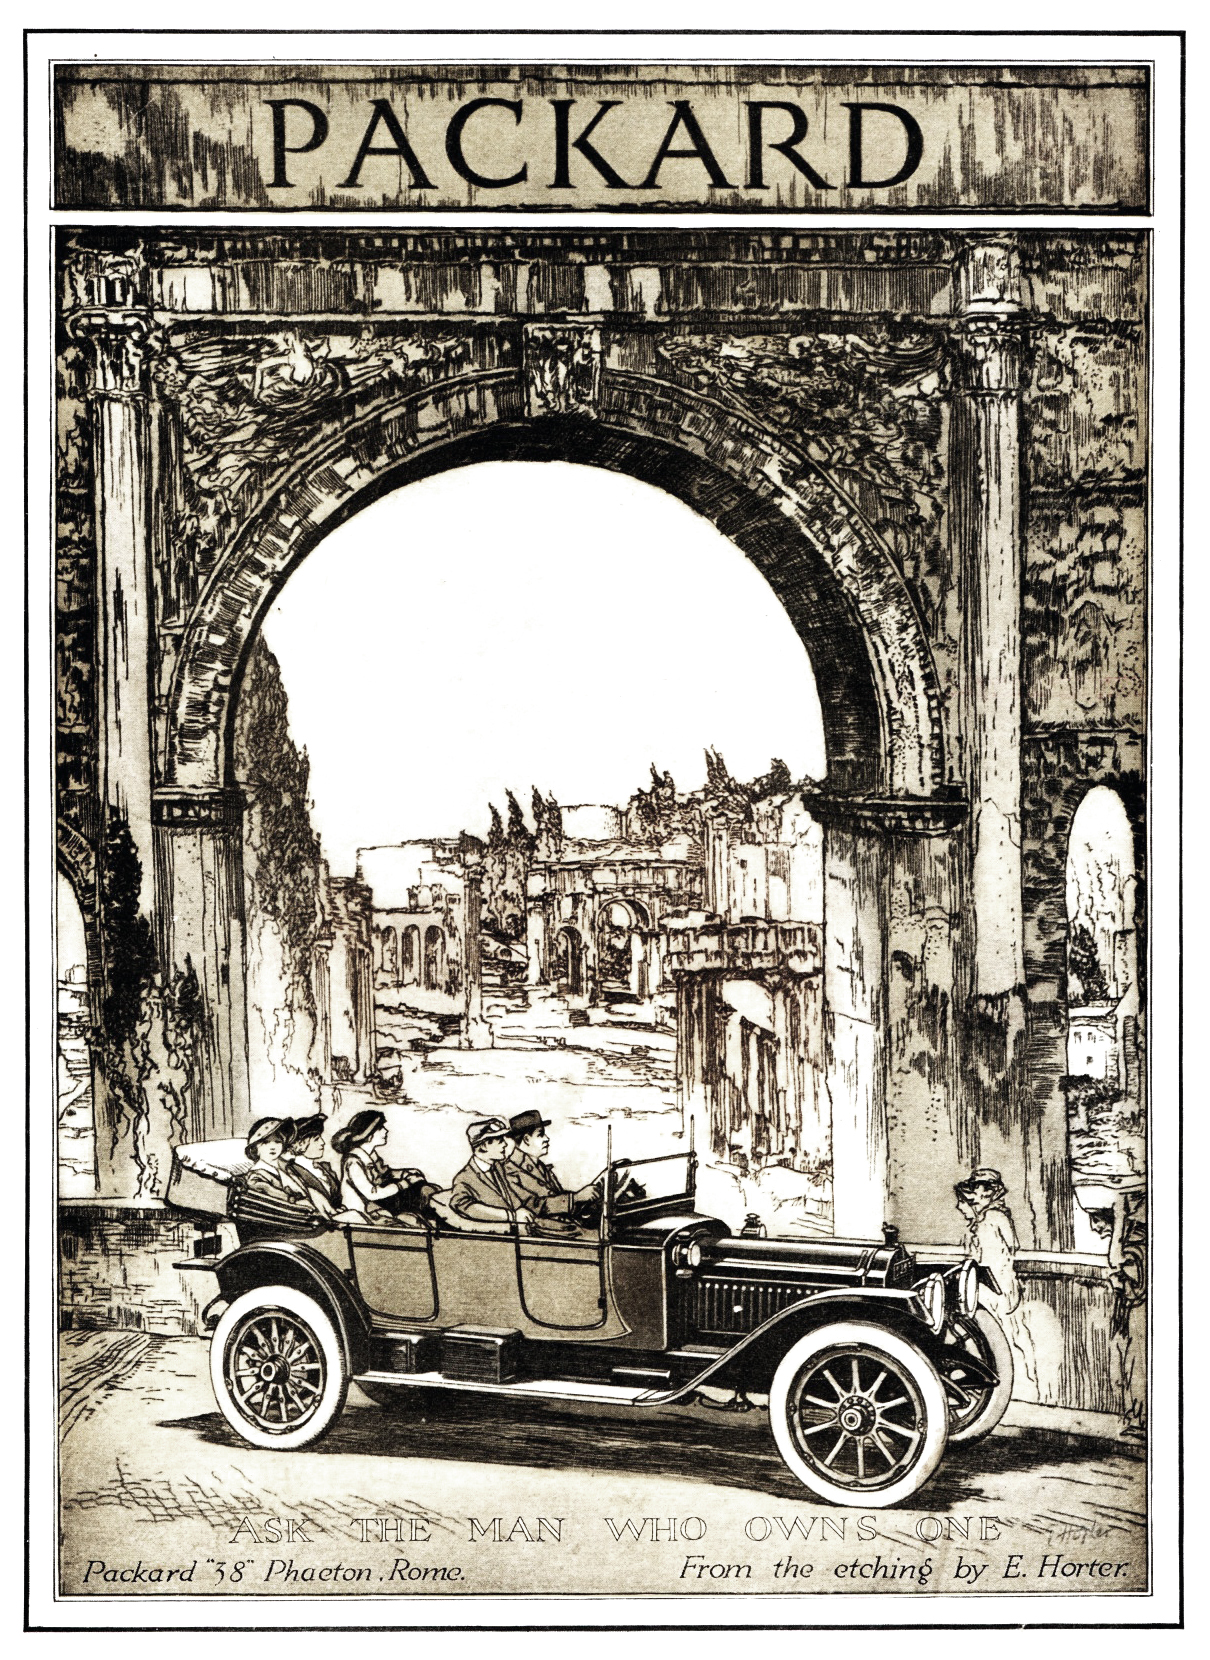 Packard '38' Phaeton Ad (March–June, 1913): Rome - From the etching by Earl Horter